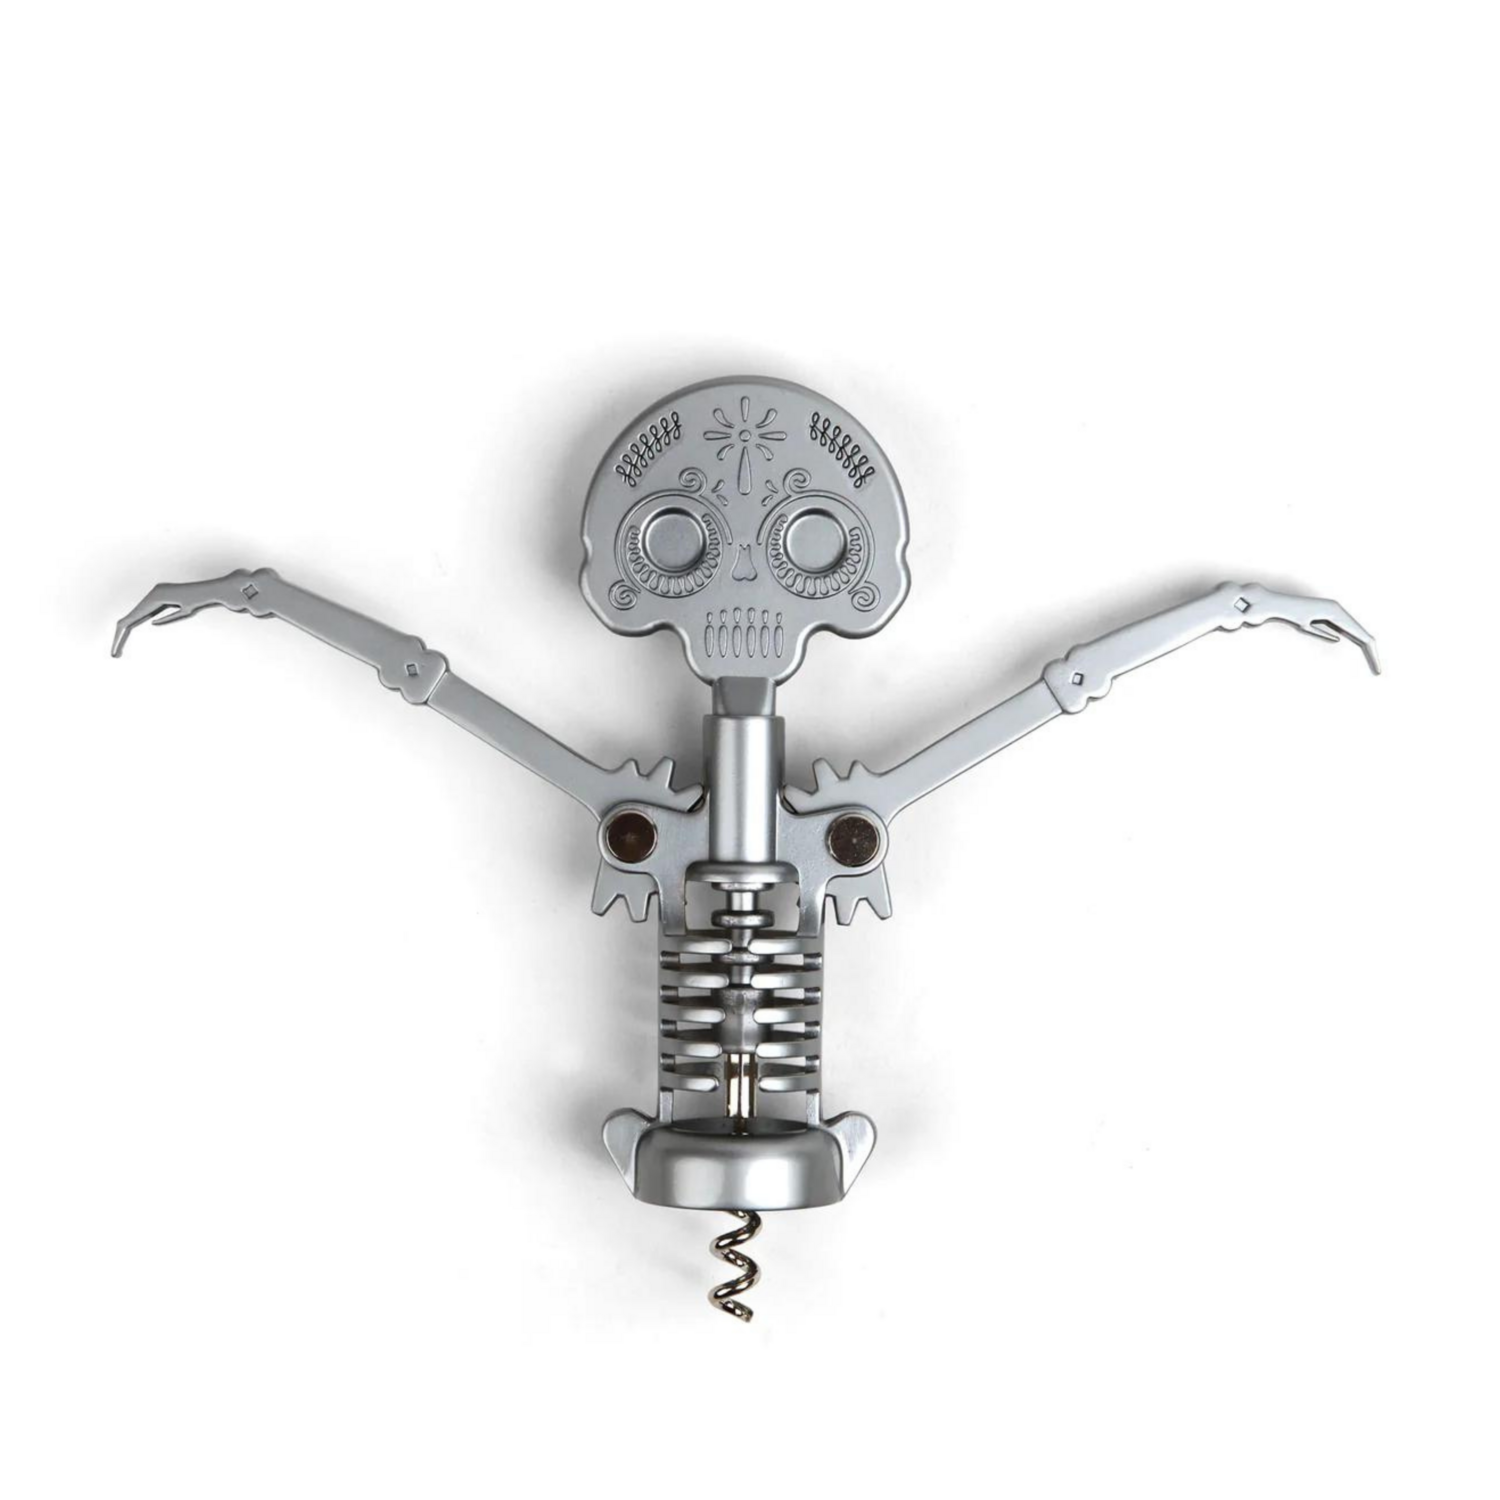 DAY OF THE DEAD CORKSCREW